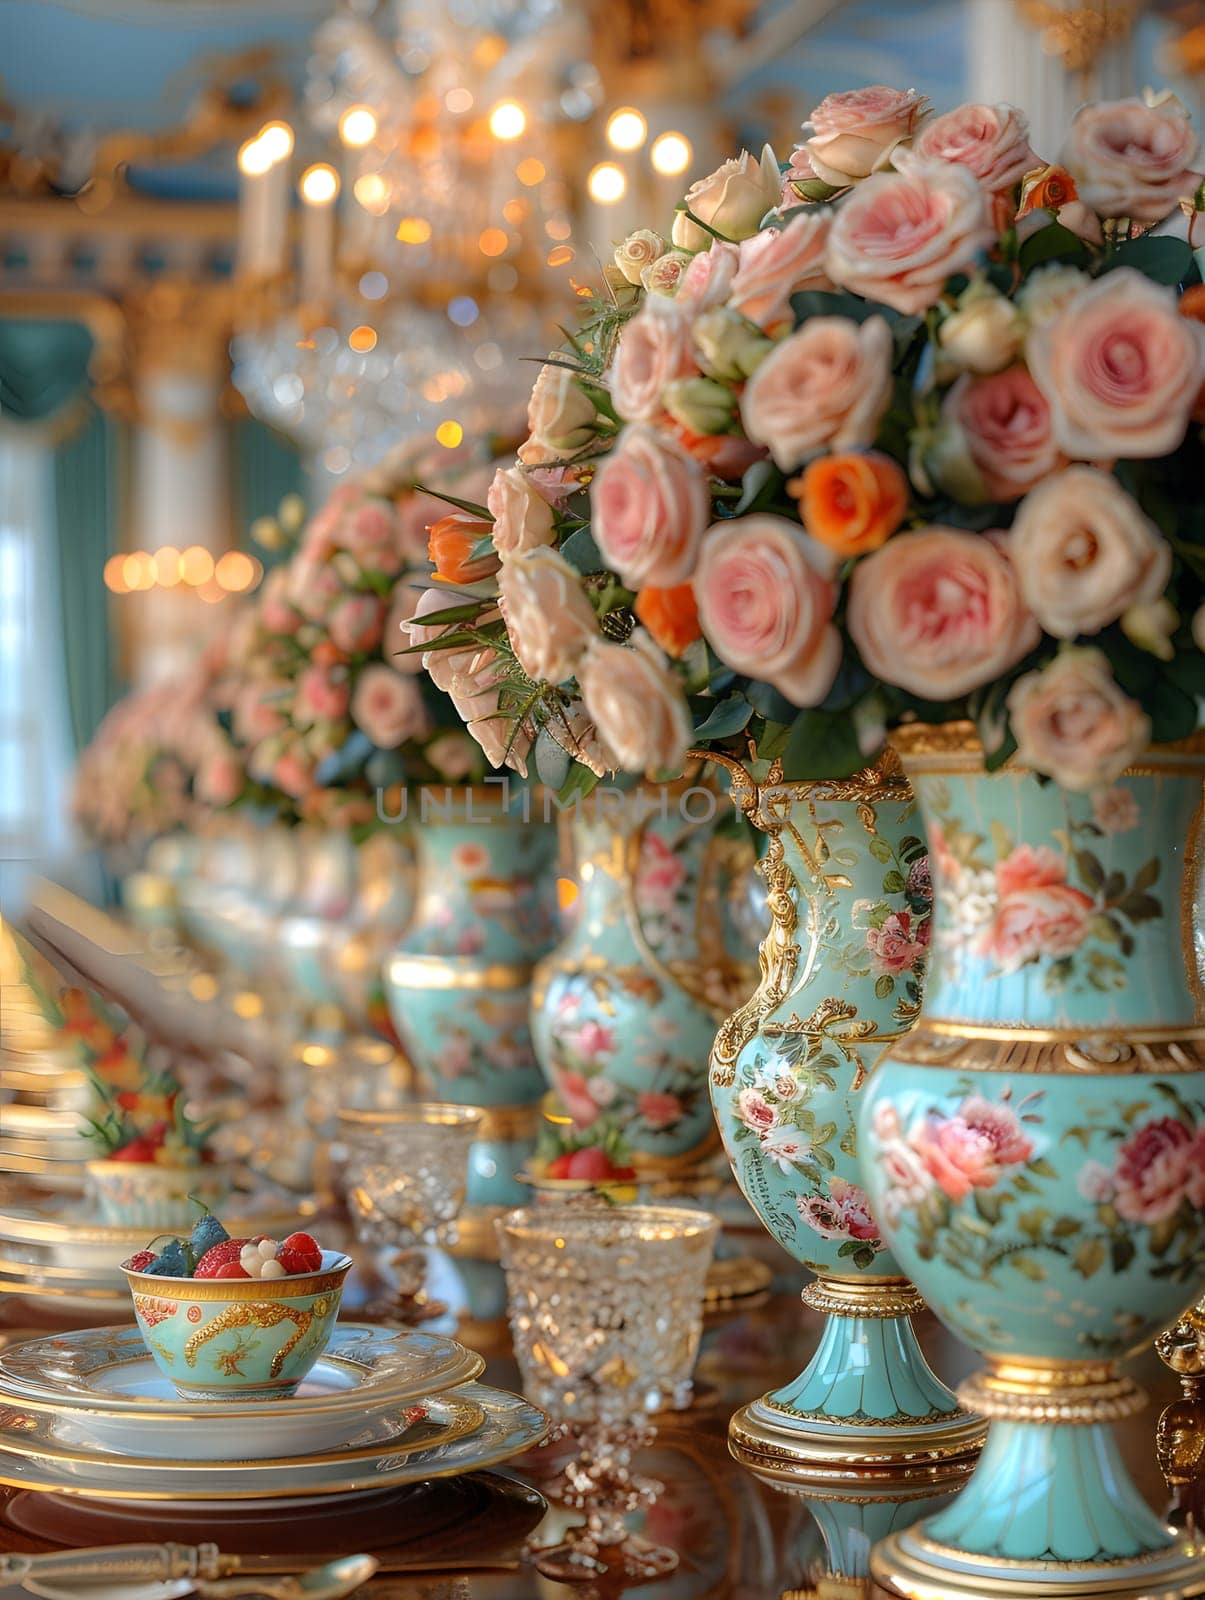 A line of vases brimming with flowers displayed on the table by Nadtochiy